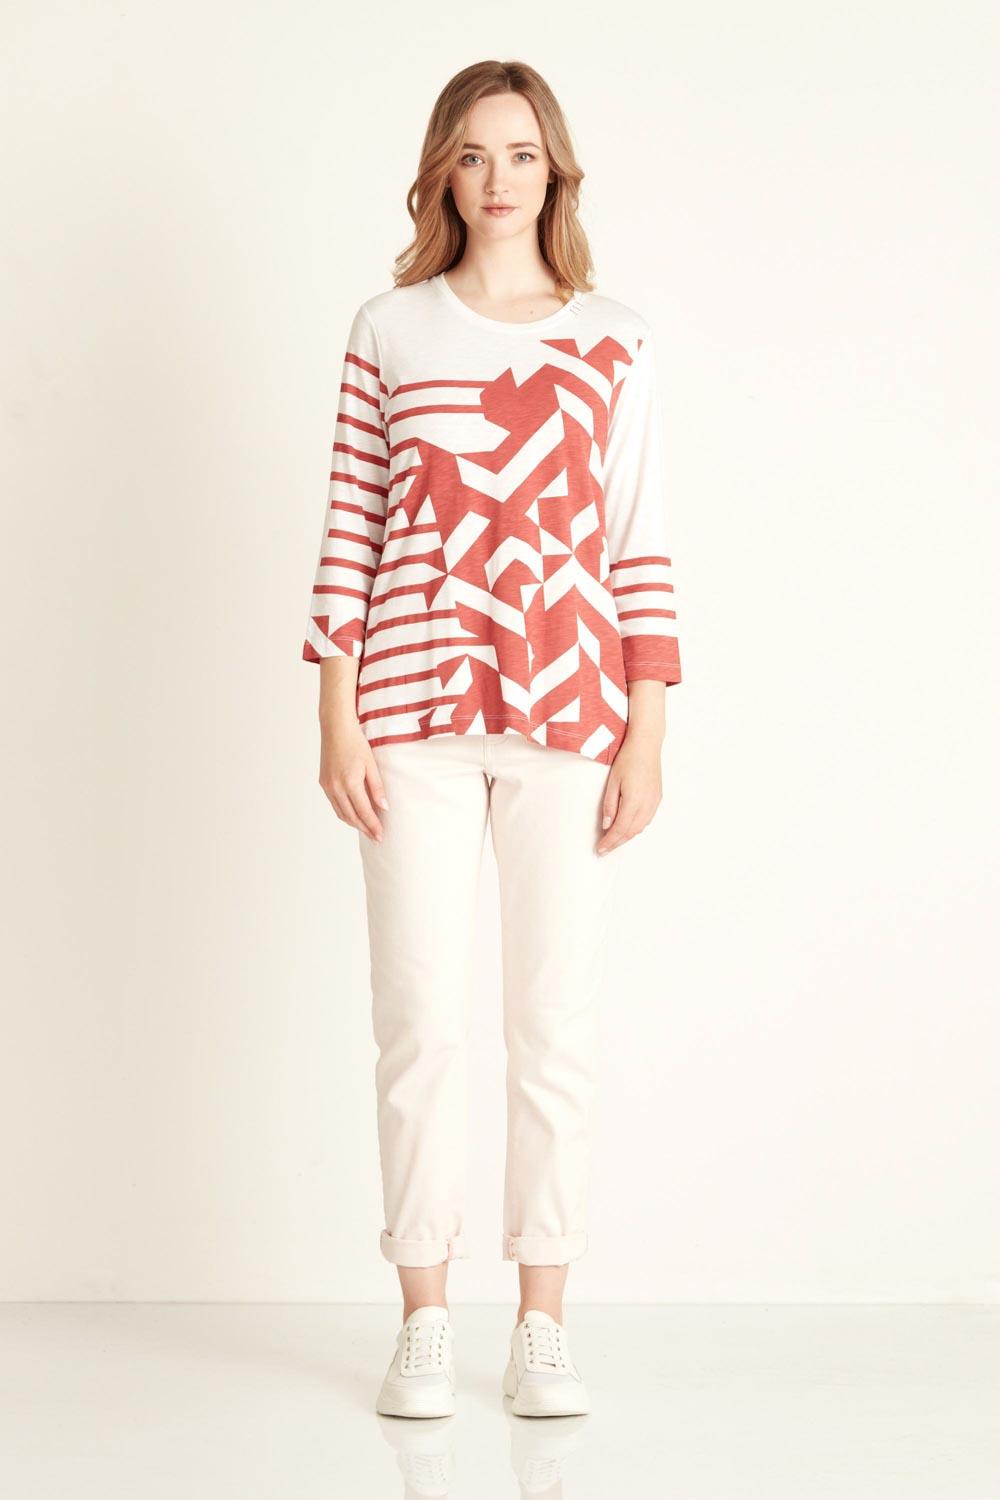 Rhianna Top - White/Washed Red - Tee VERGE